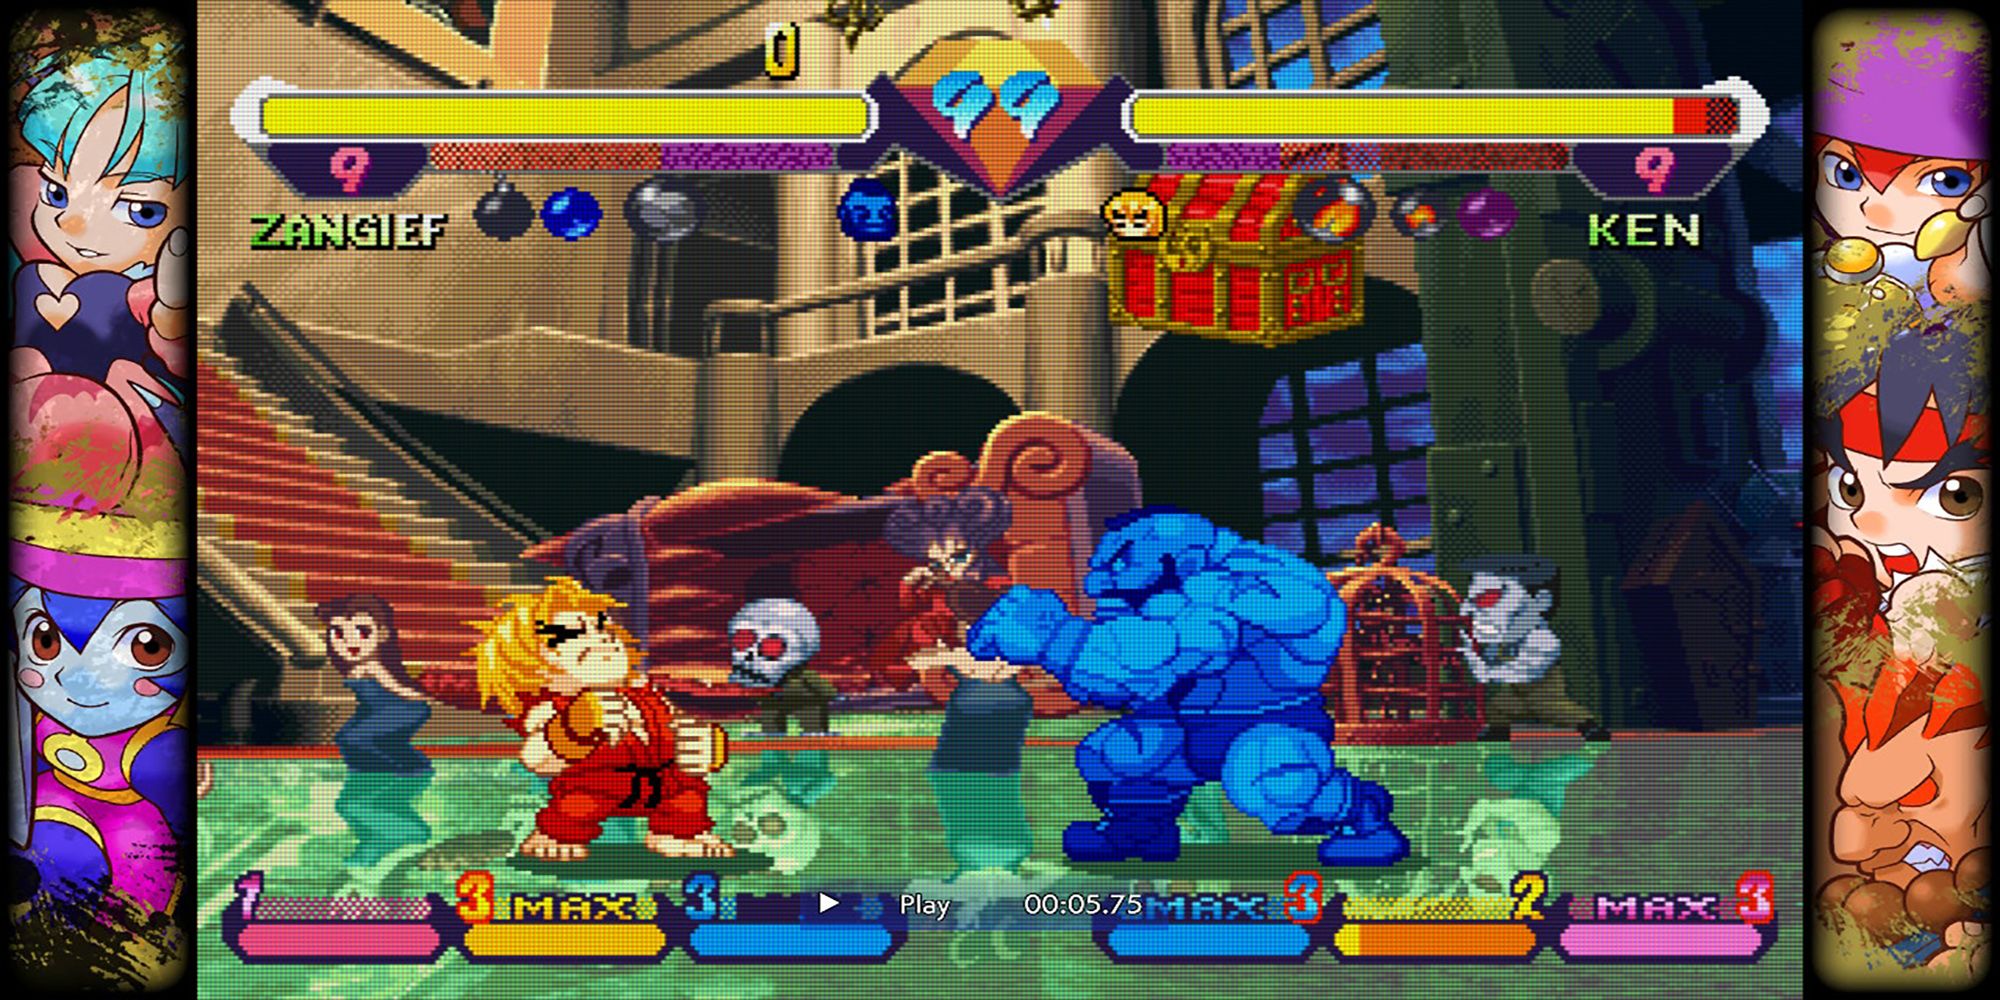 Zangief's deflects Ken's attack with a Guard Cancel during a battle inside Makai in Pocket Fighter, a game in Capcom Fighting Collection.